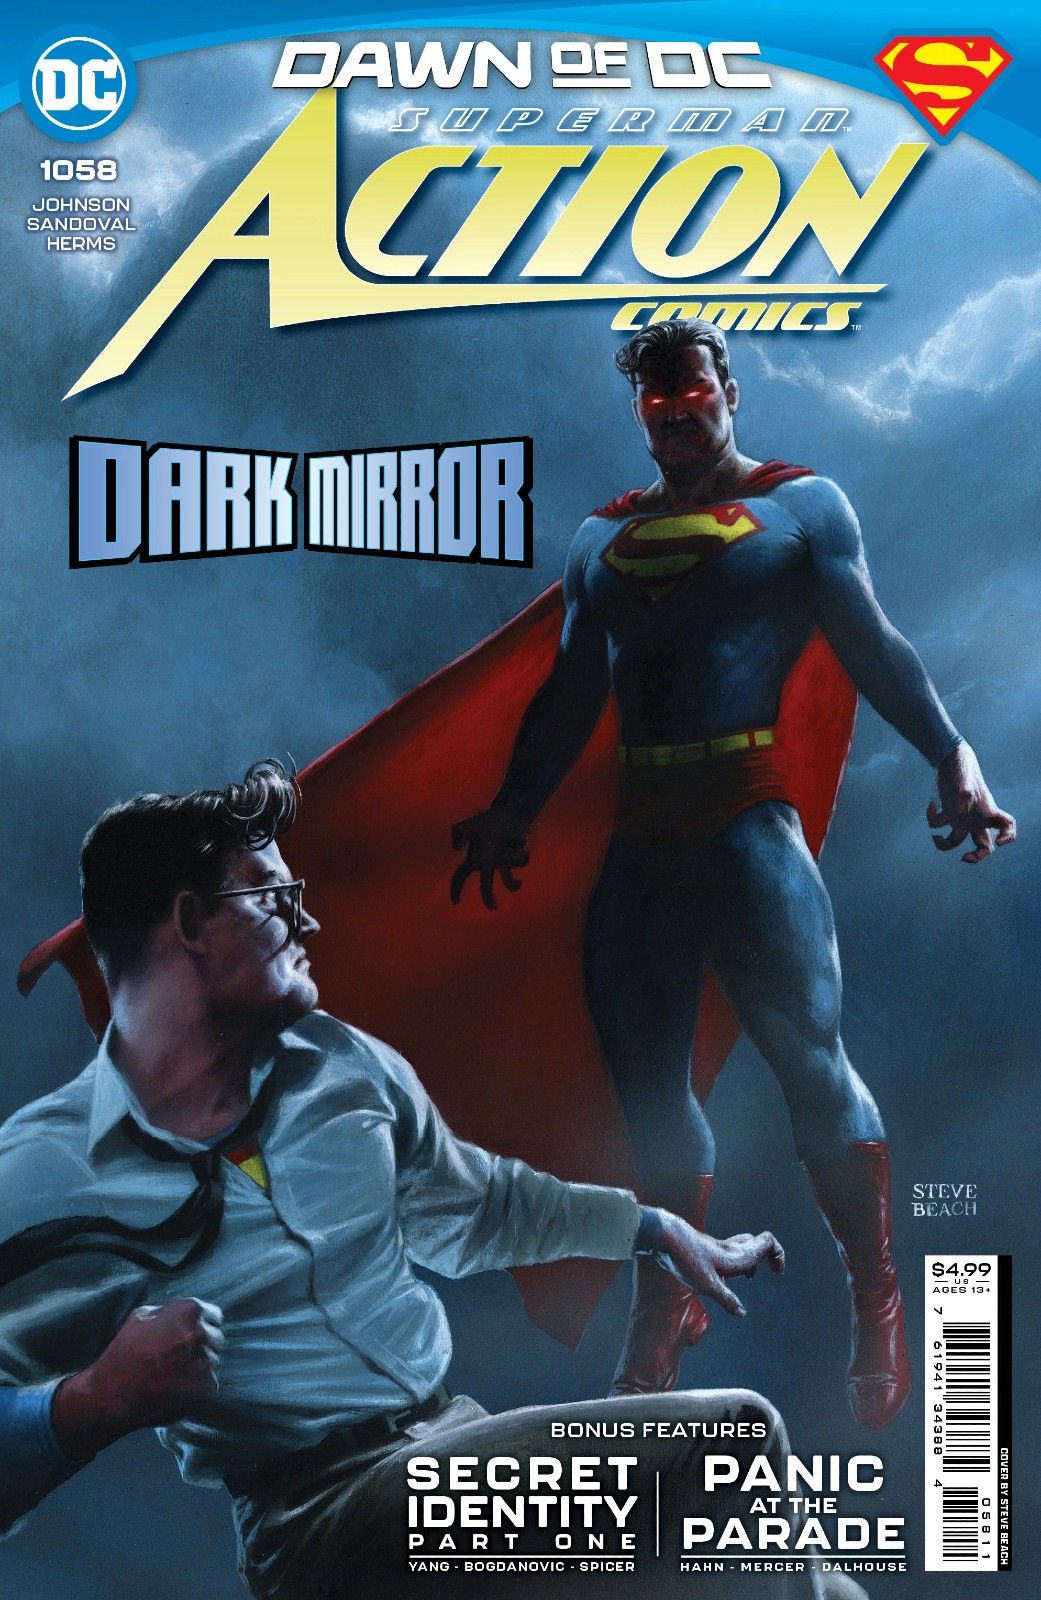 Superman confronts a dark version of himself in Action Comics (Vol. 1) #1058 by DC Comics